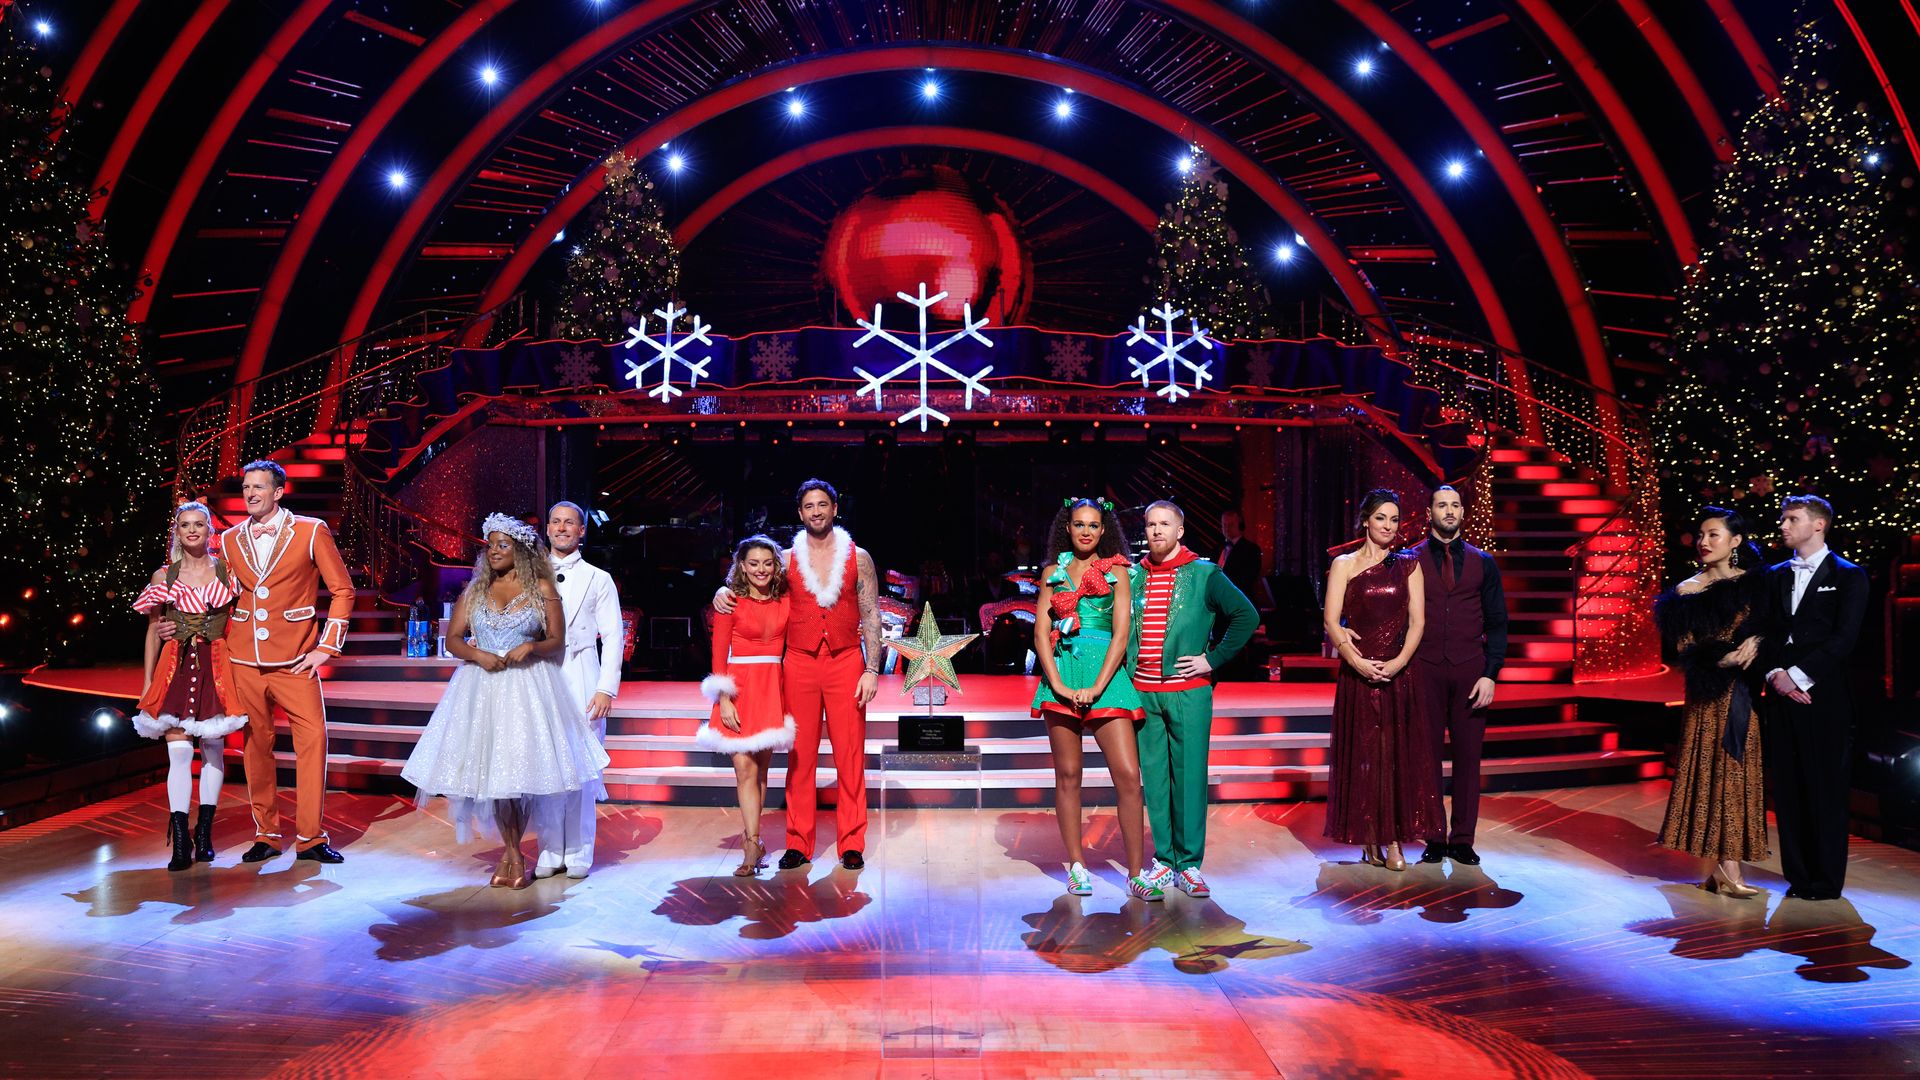 Strictly Come Dancing’s Christmas special winner revealed - find out who